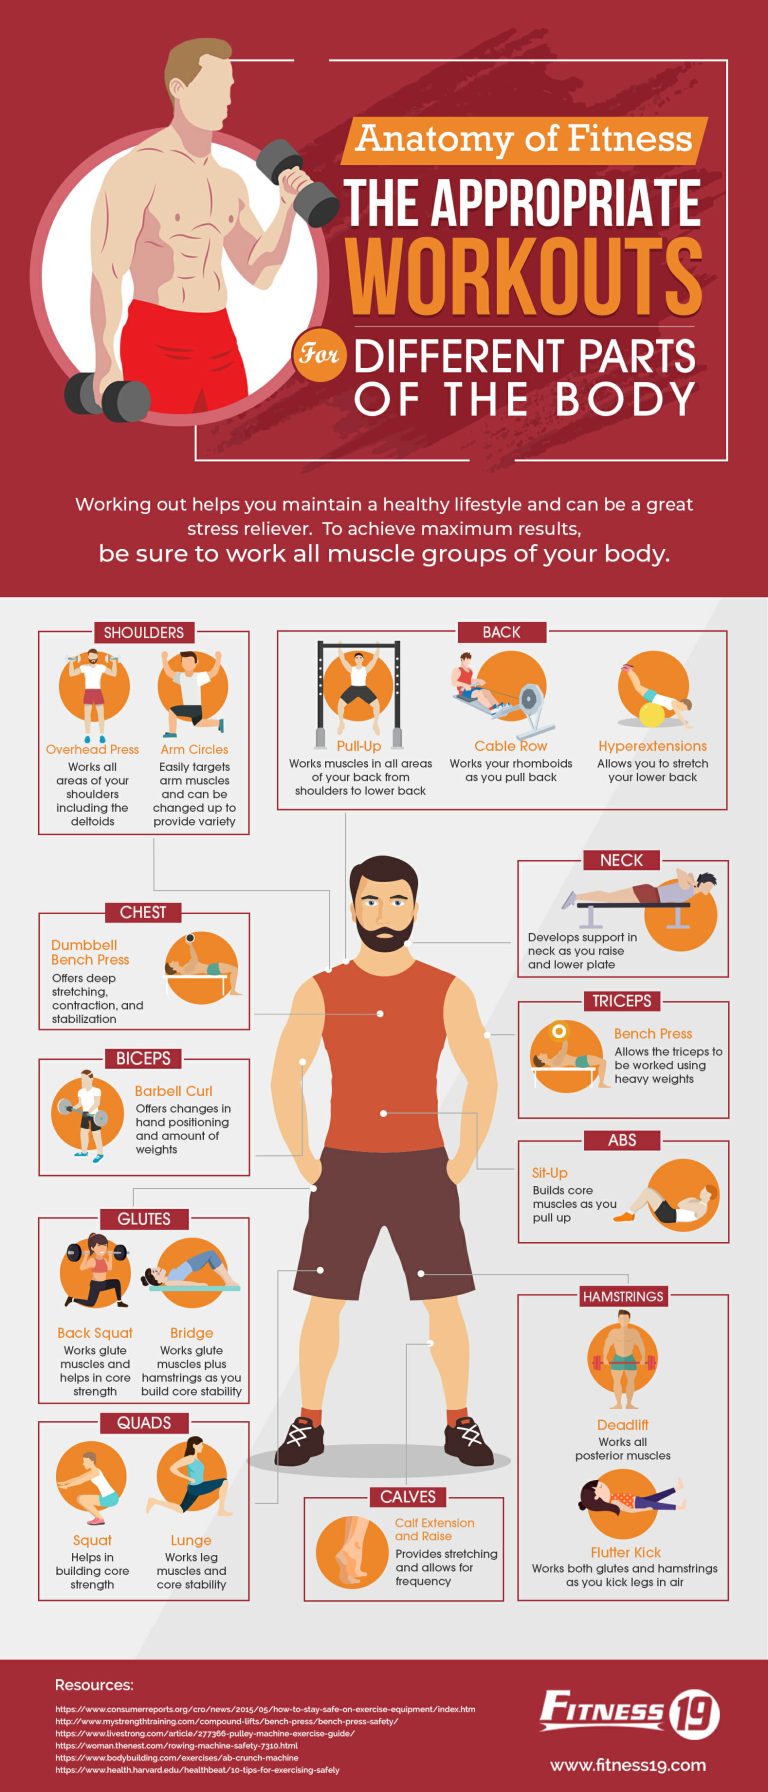 Anatomy-of-Fitness-The-Appropriate-Workouts